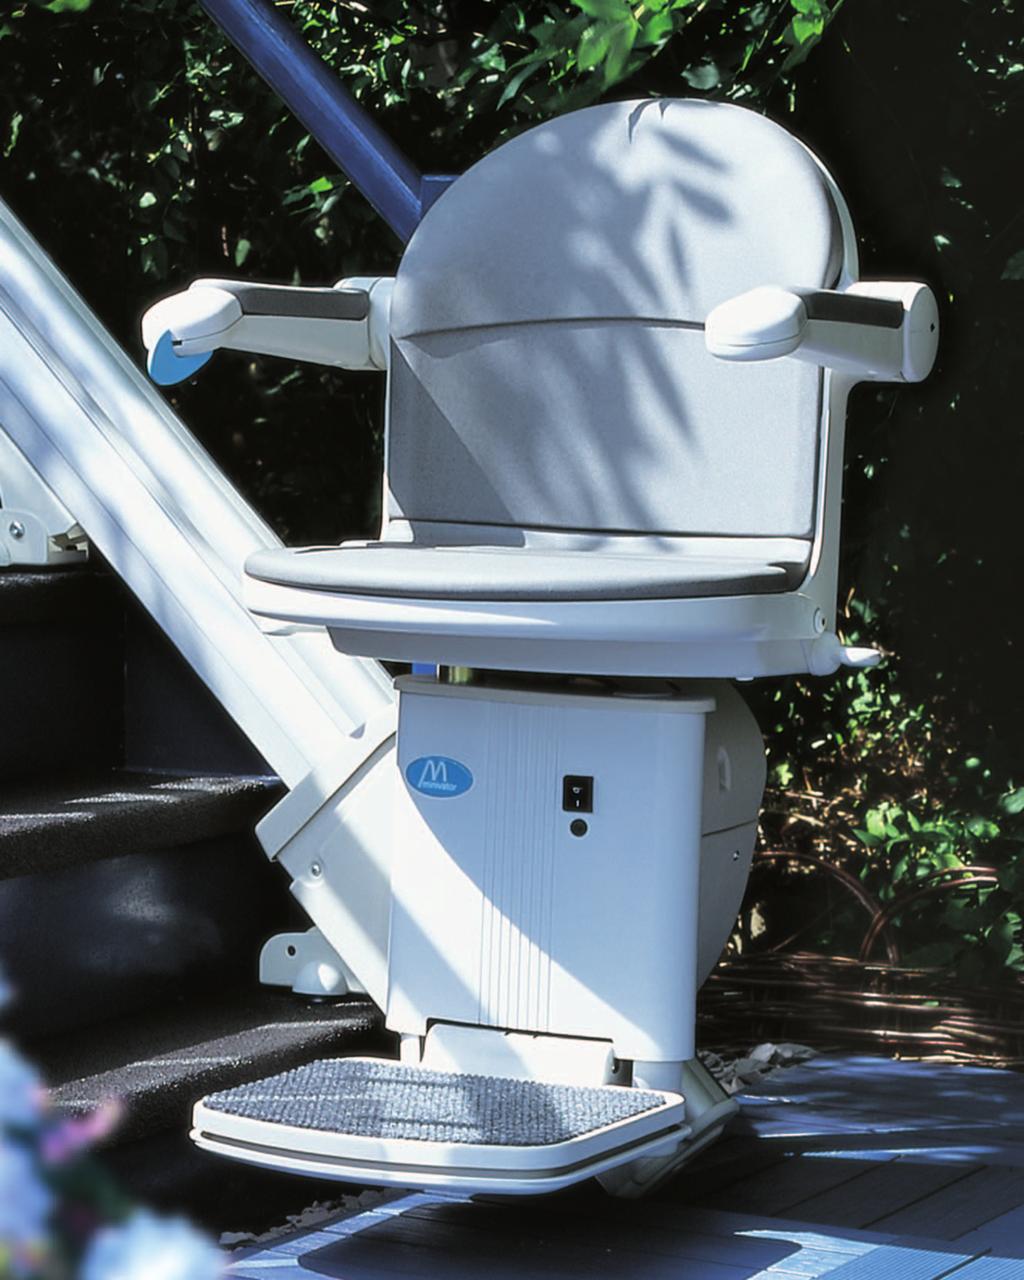 Outdoor stairlift It isn t only stairs inside the home that cause problems for some people. Steps up to a porch or front door can be equally difficult to climb.